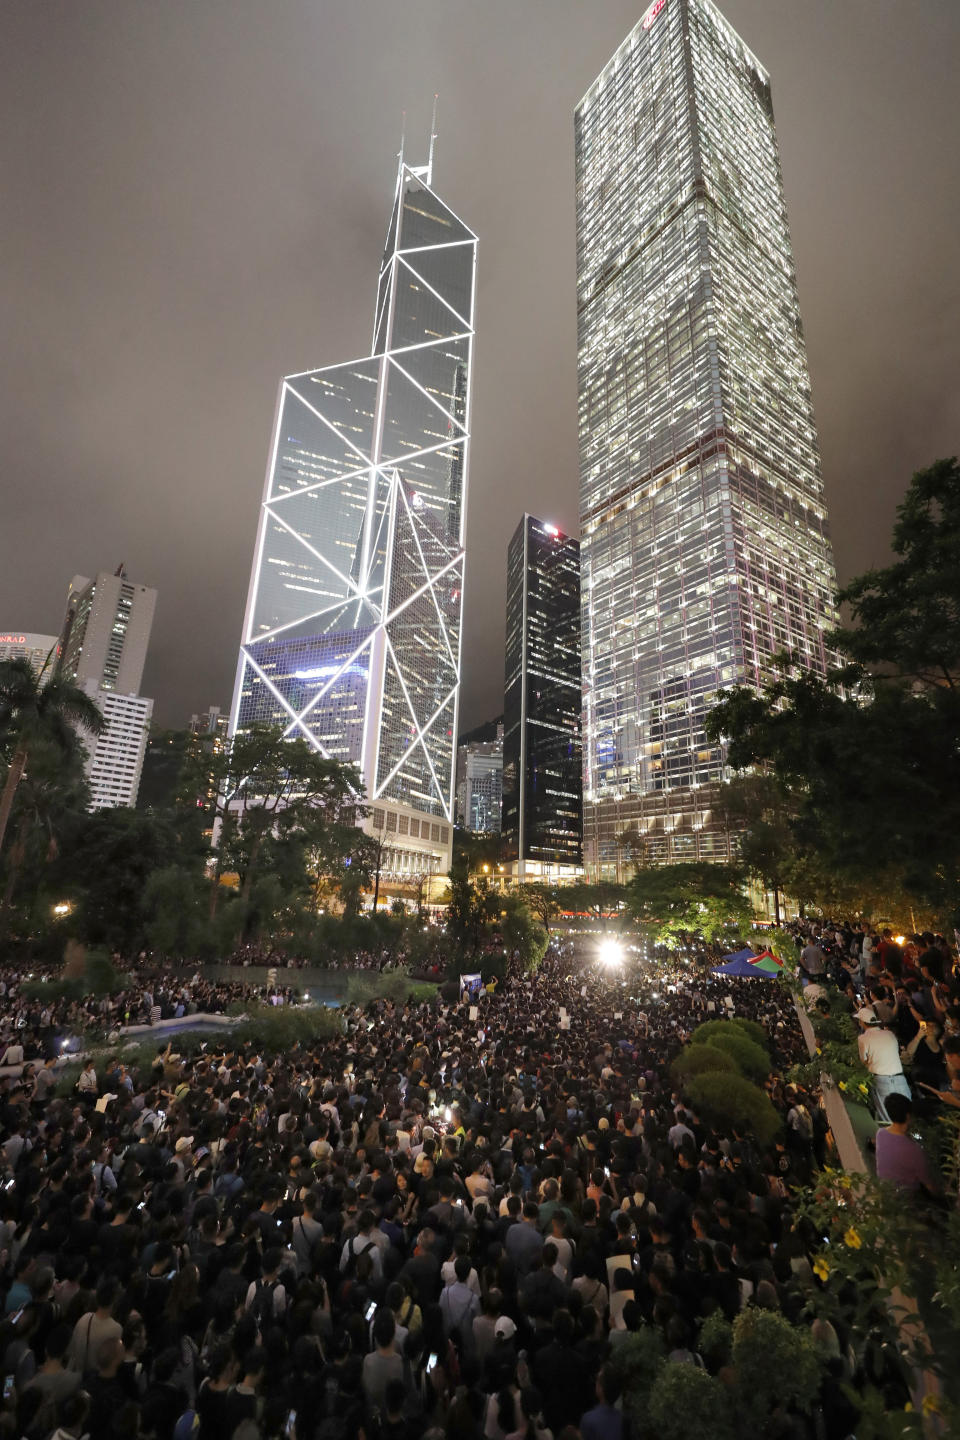 Protesters gather at a demonstration by civil servants in Hong Kong Friday, Aug. 2, 2019. Protesters plan to return to the streets again this weekend, angered by the government's refusal to answer their demands, violent tactics used by police - possibly in coordination with organized crime figures. (AP Photo/Vincent Thian)